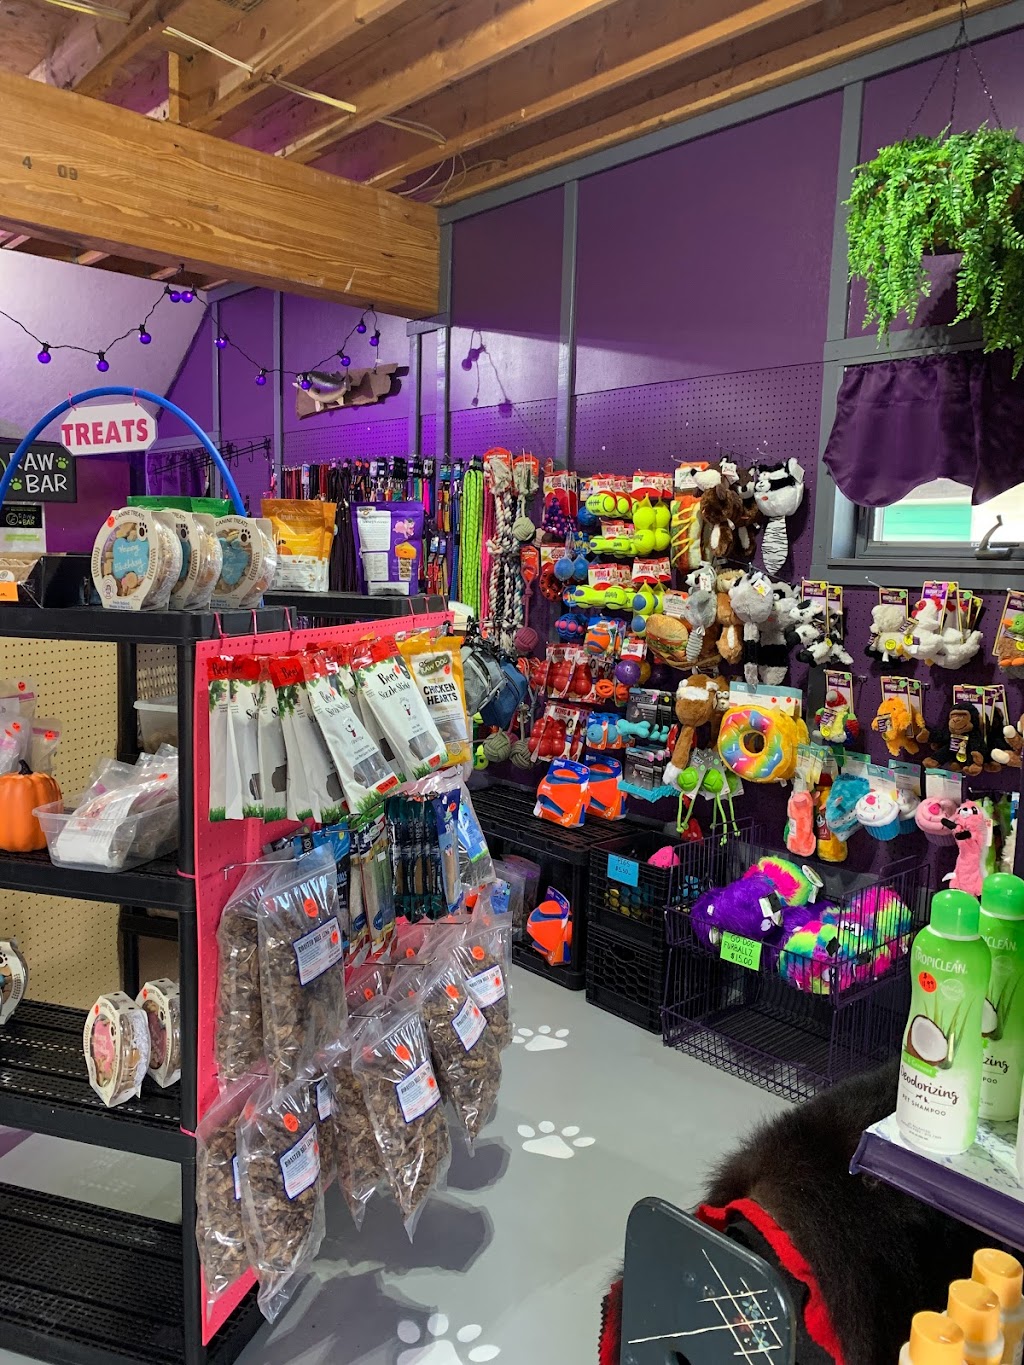 WE "R" WILD Affordable dog food & Supplies for Every Dog | Behind Dollar General, Across From Polk Elementary, 643 Interchange Rd, Kresgeville, PA 18333 | Phone: (610) 681-4117